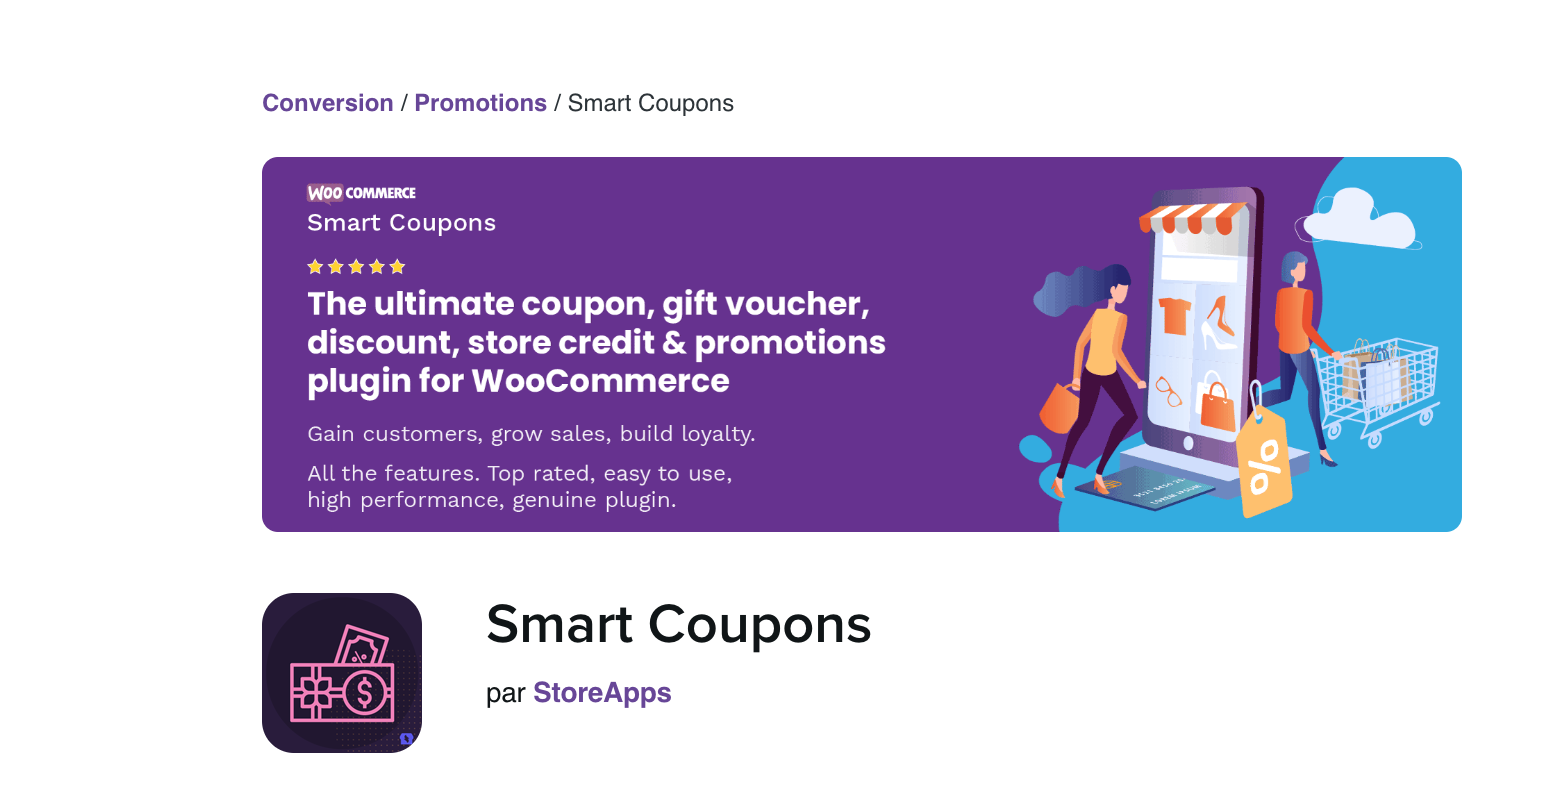 Smart Coupons by StoreApps